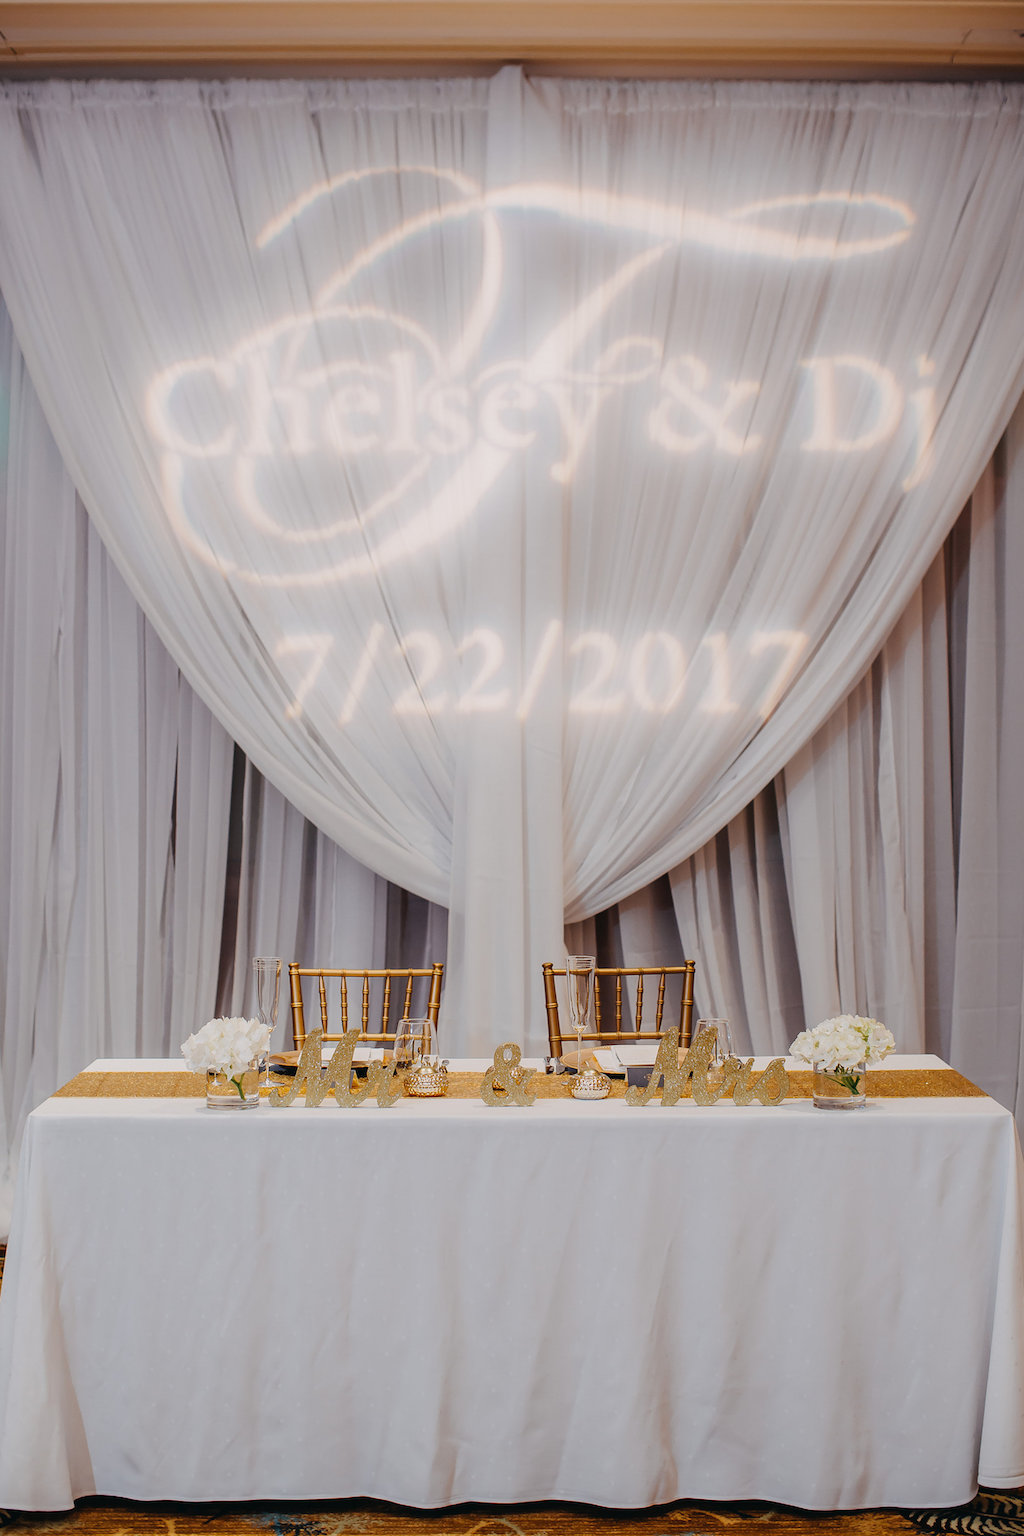 Custom Bride and Groom Name Light Projection on White Draping Behind Simple Sweetheart Table with Gold Mr and MRs Sign and Gold Table Runner | Tampa Bay Wedding Rentals and Lighting Gabro Event Services